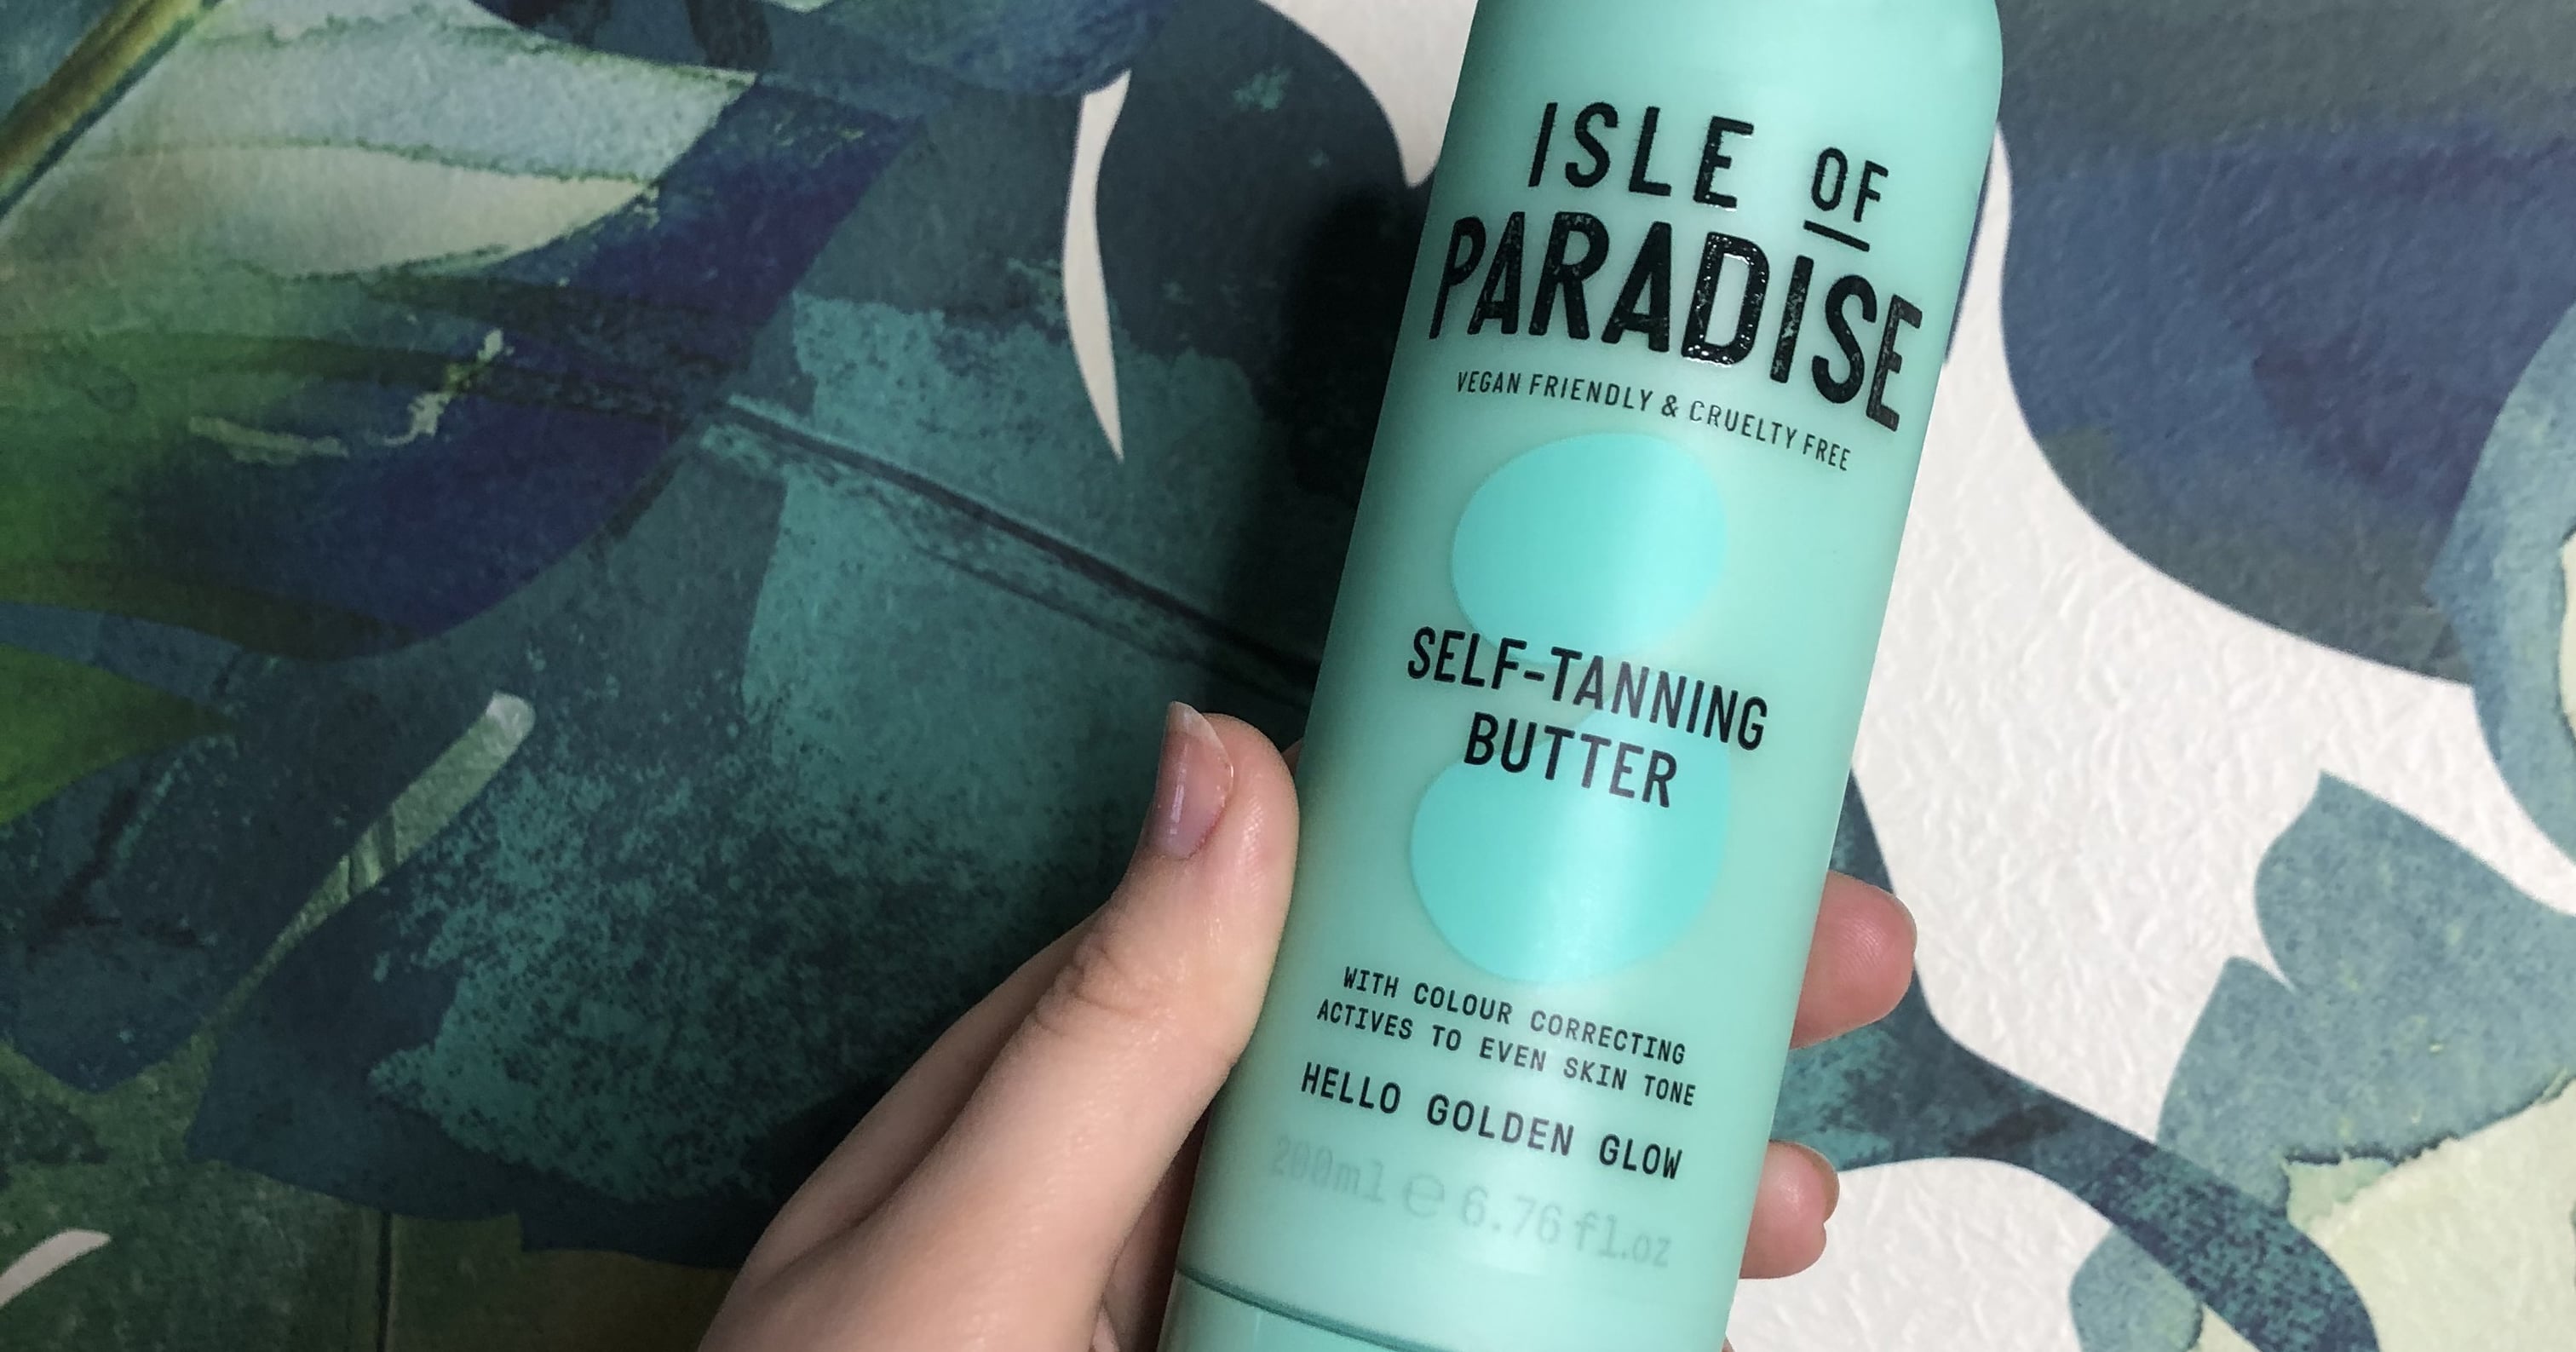 product review: isle of paradise self tanning drops + body butter — cup of t